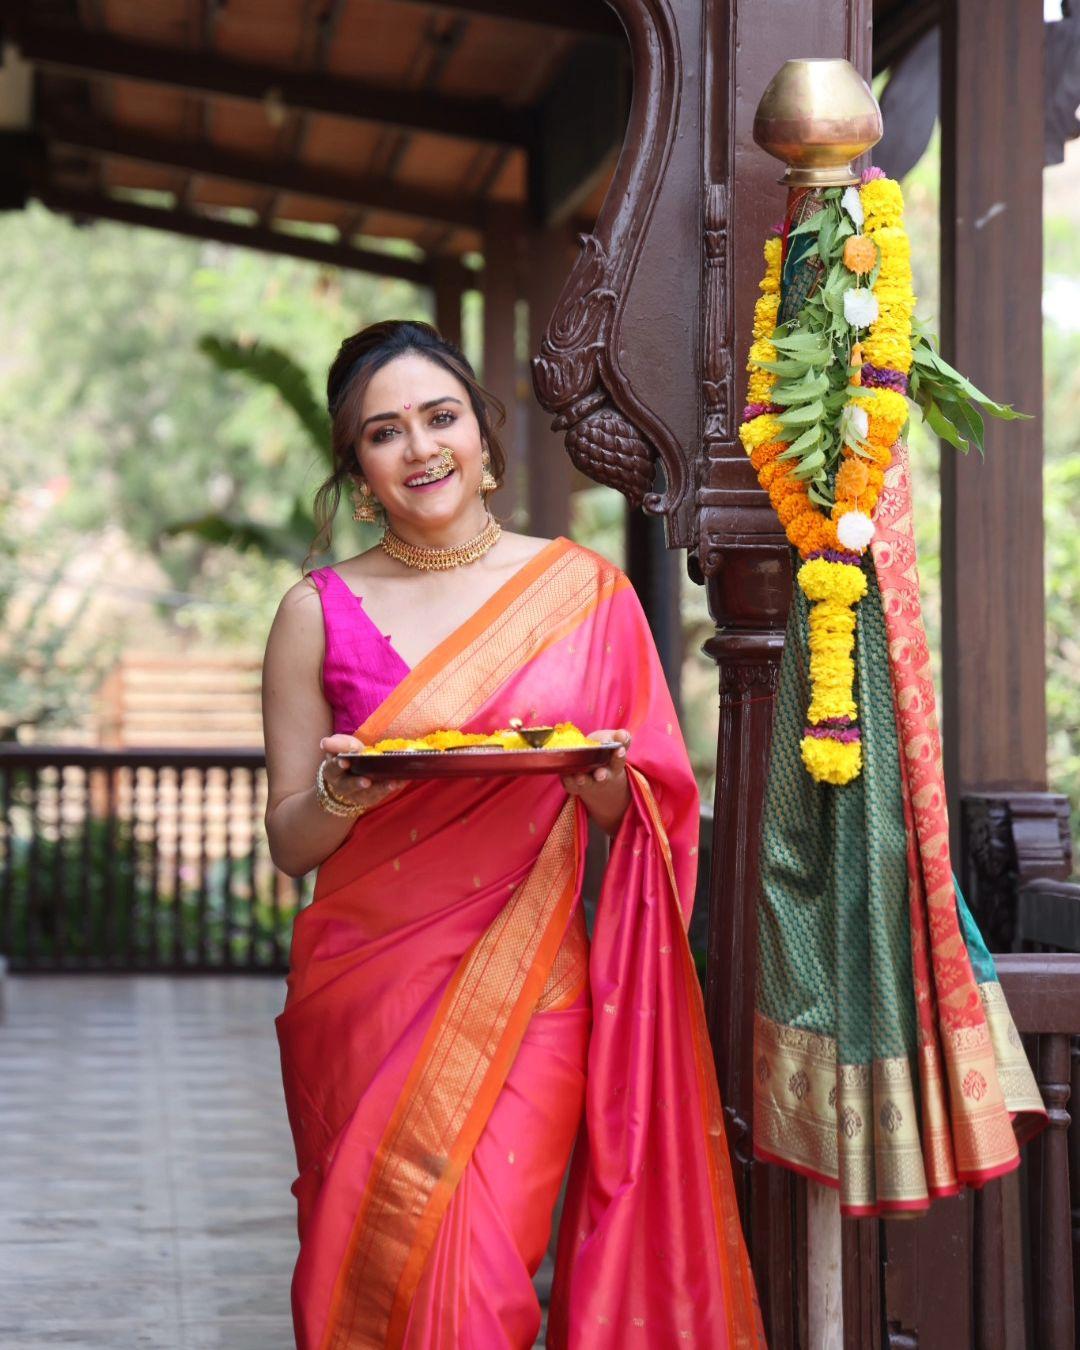 Amruta wore the stunning saree and paired it with a strappy blouse. She tied her hair in a bun and let her baby hair flow